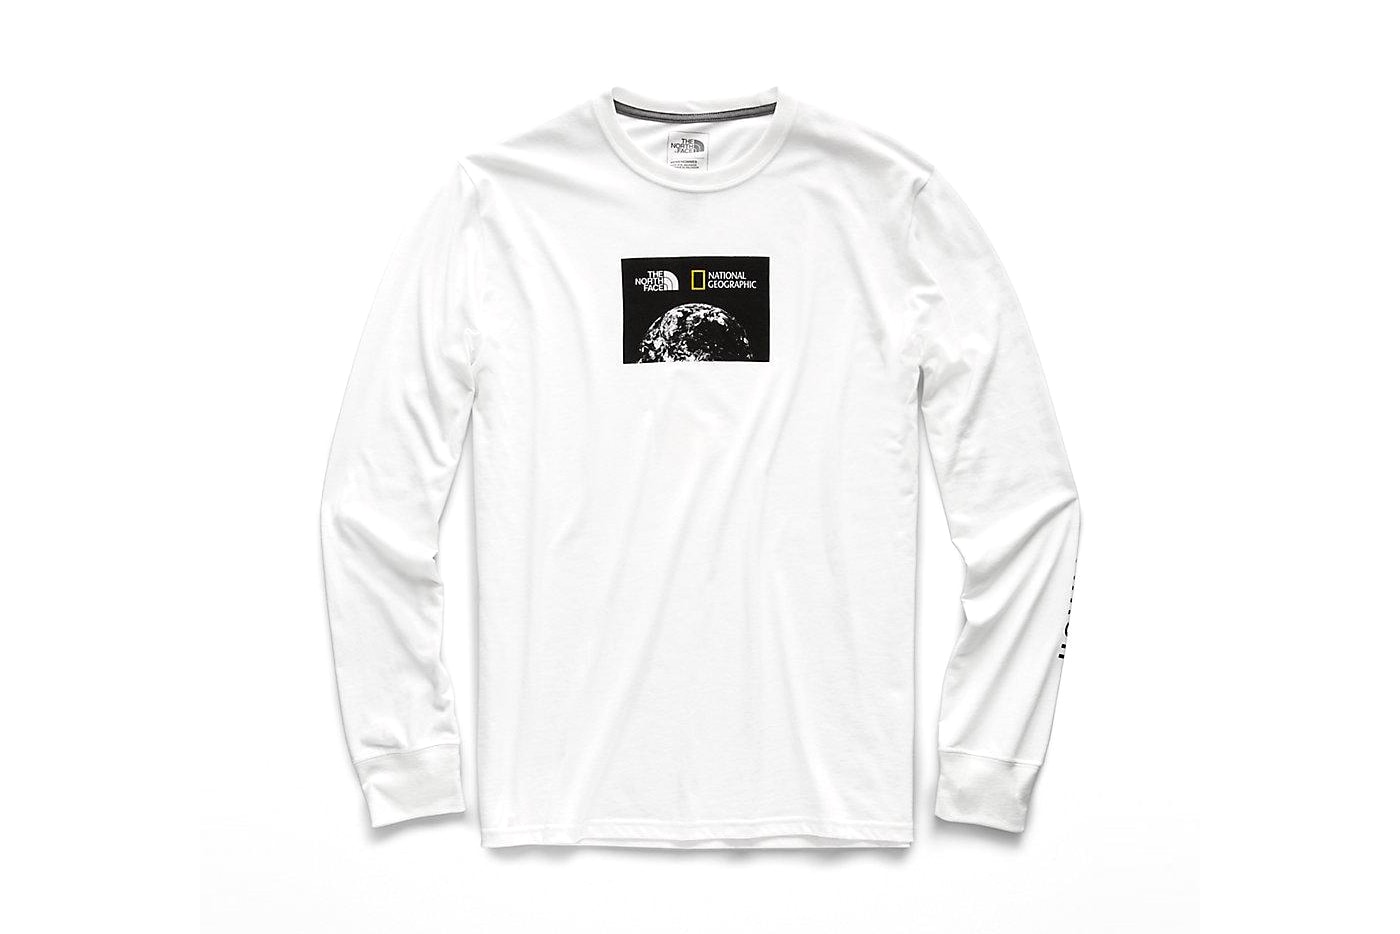 national geographic north face bottle source collaboration tee shirts limited edition white long sleeve graphic